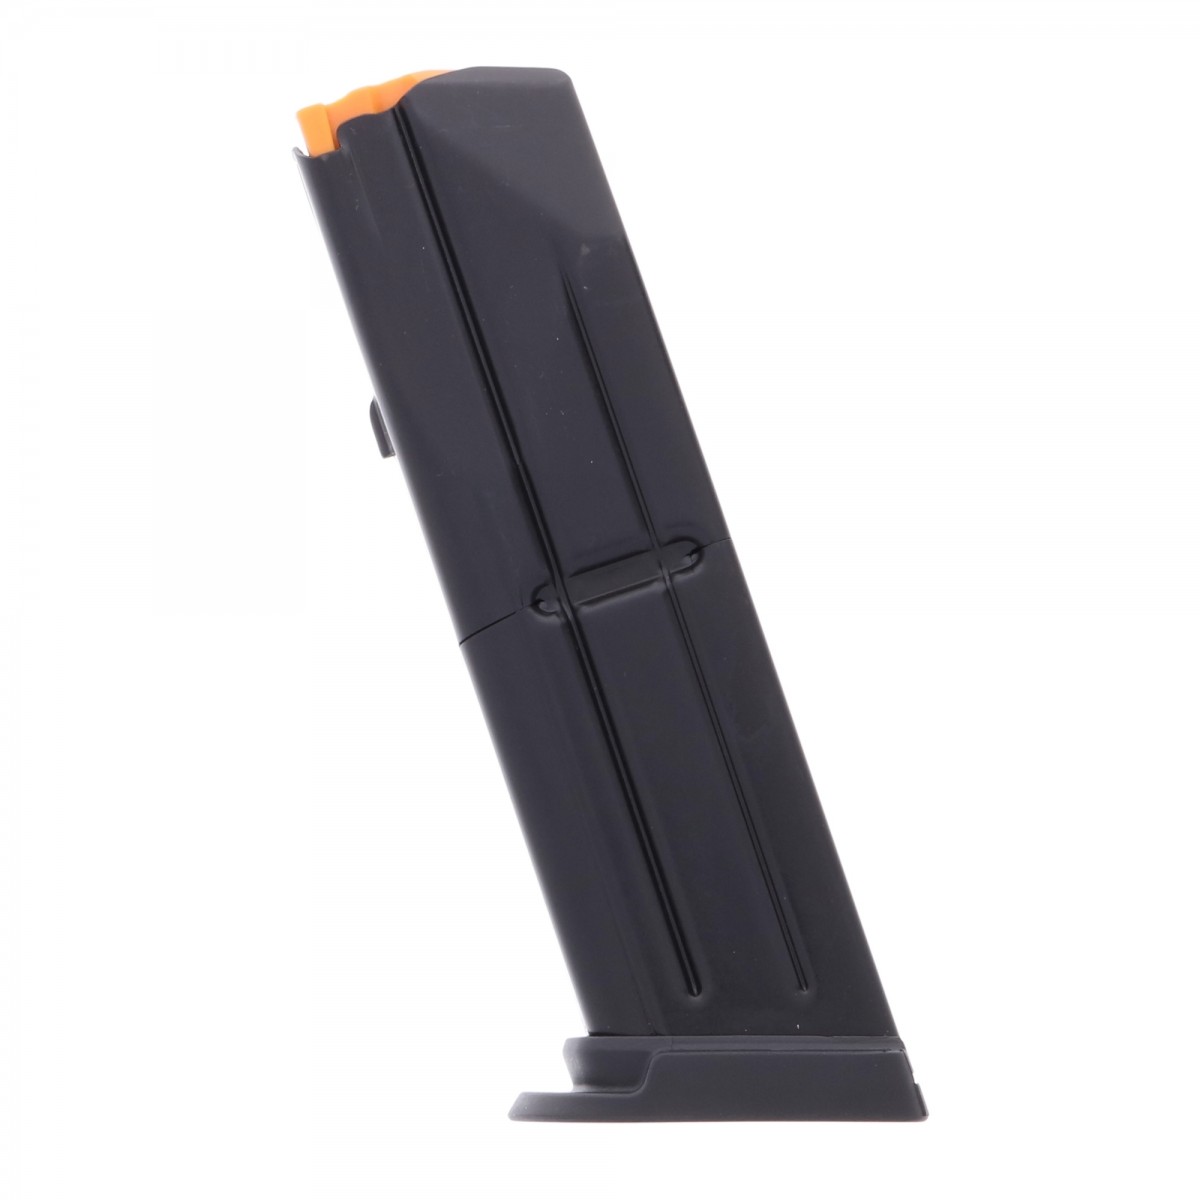 FN Fnp9 Replacement Magazine 9mm Luger 10 Round Matte Stainless 47104 for sale online 